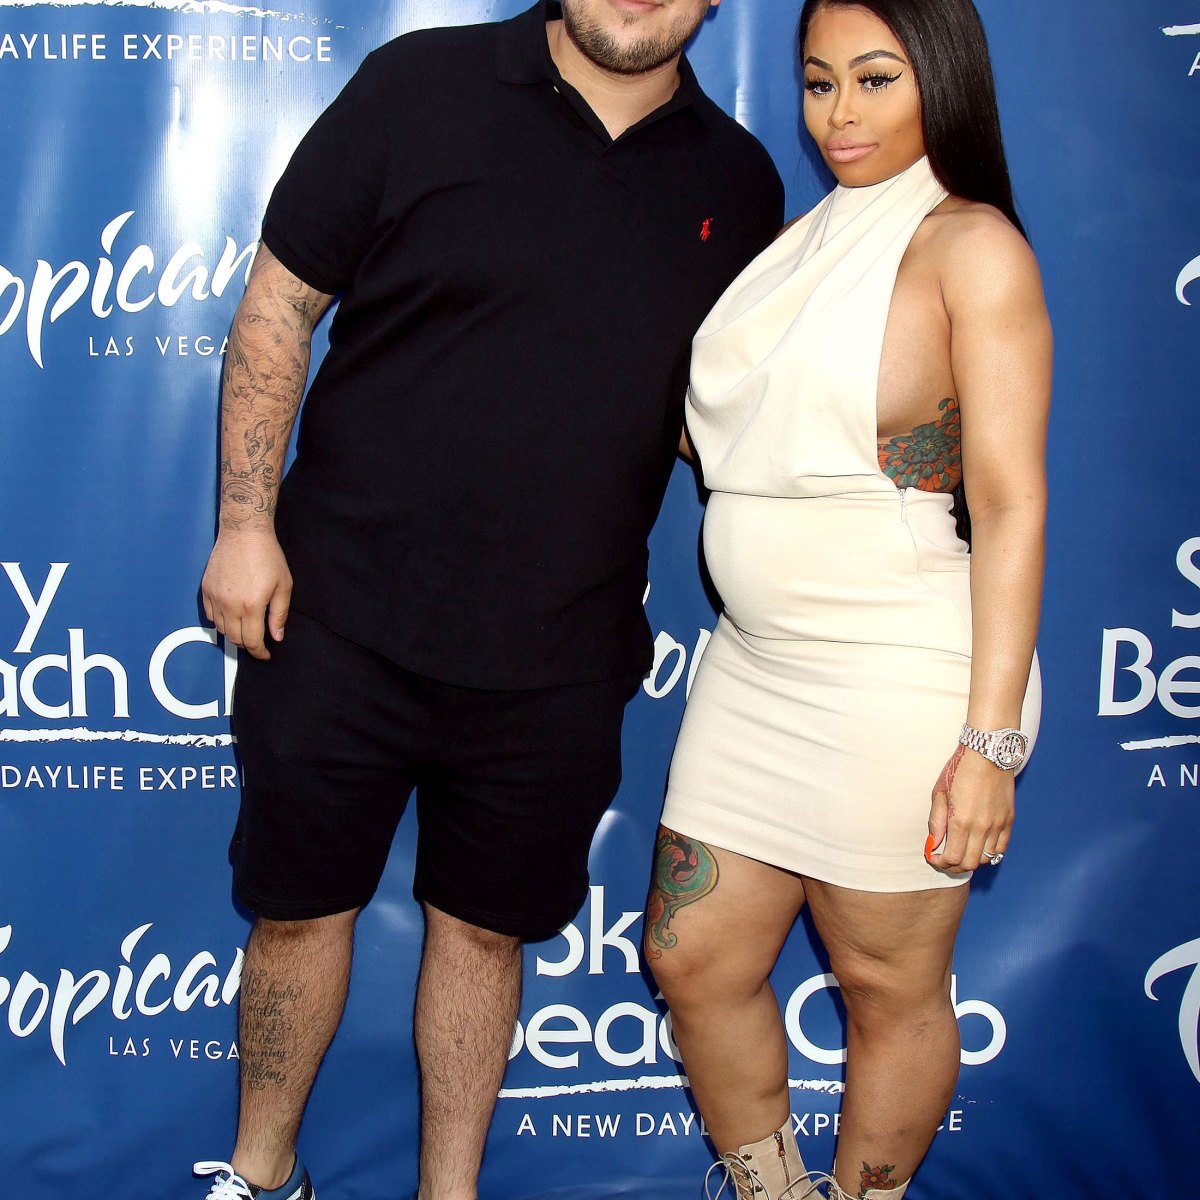 Rob Kardashian Defends Proposing to Girlfriend in New 'Keeping Up